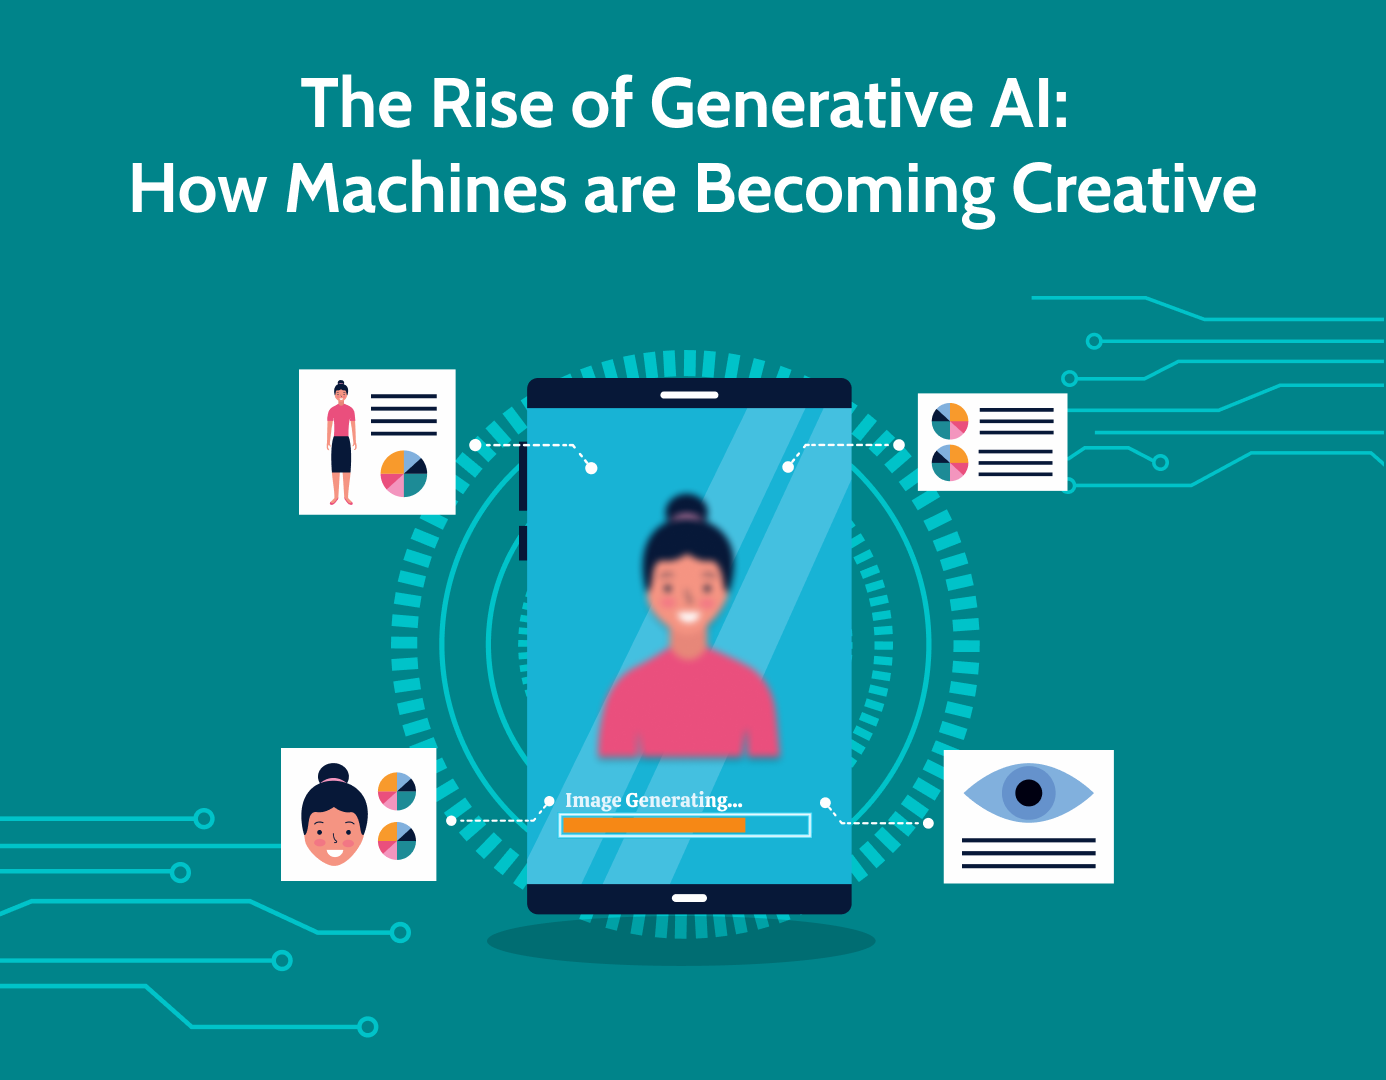 The Rise of Generative AI: How Machines are Becoming Creative